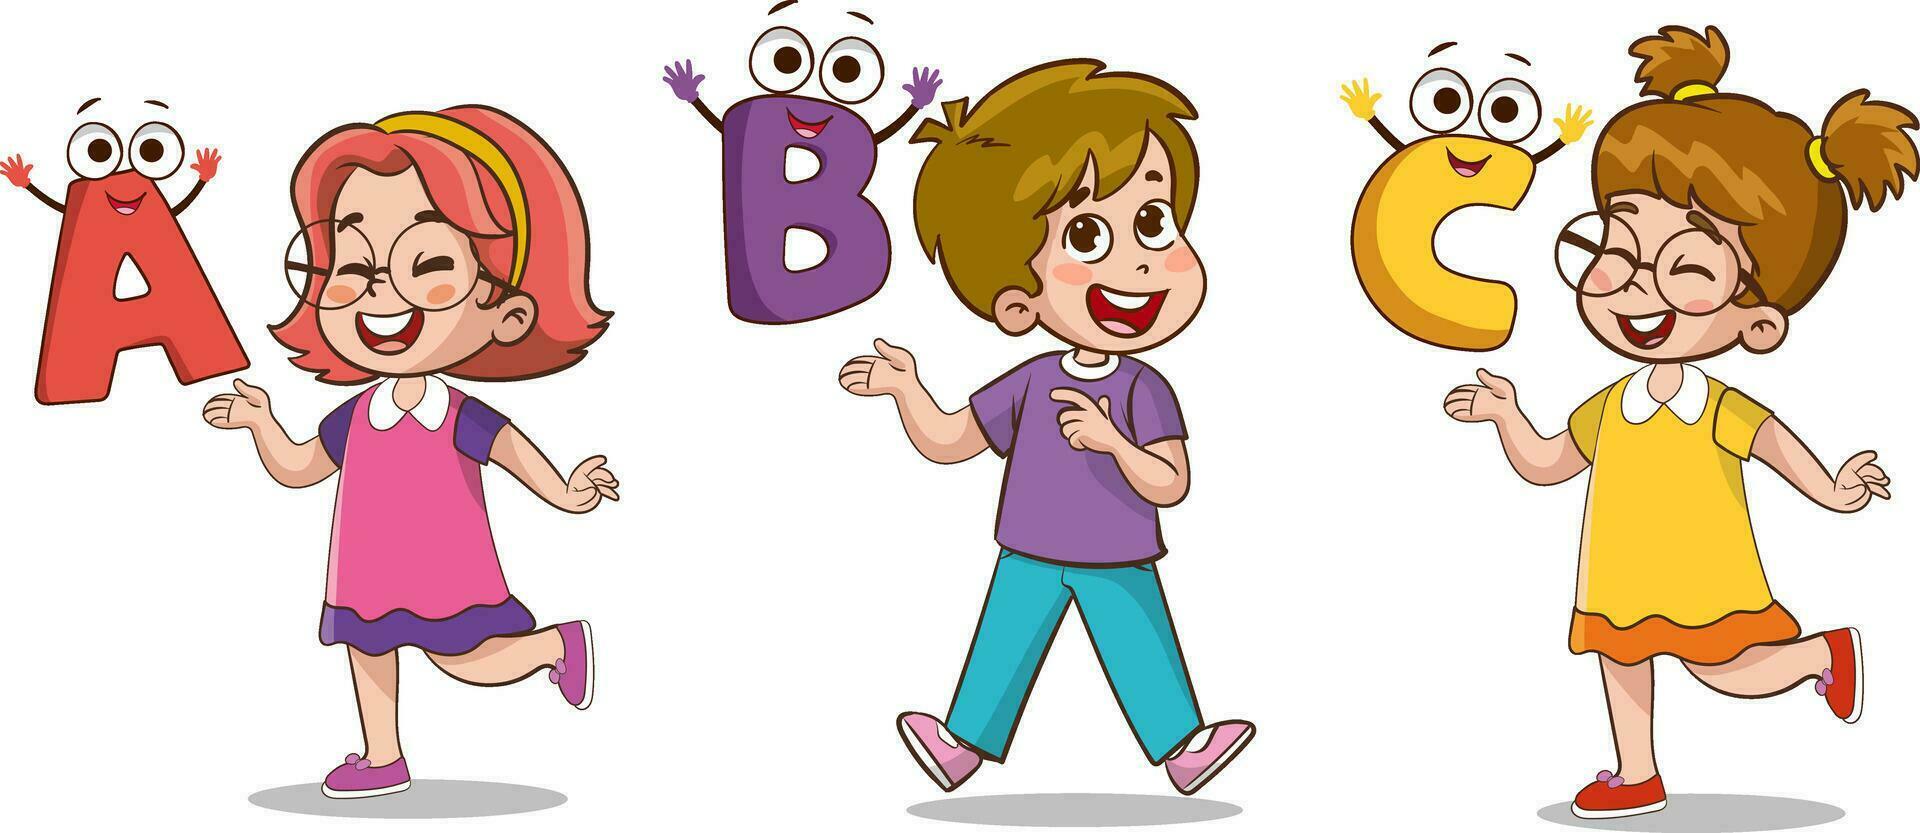 Education Concept and literacy learning vector illustration with Cartoon Characters.alphabet learning.